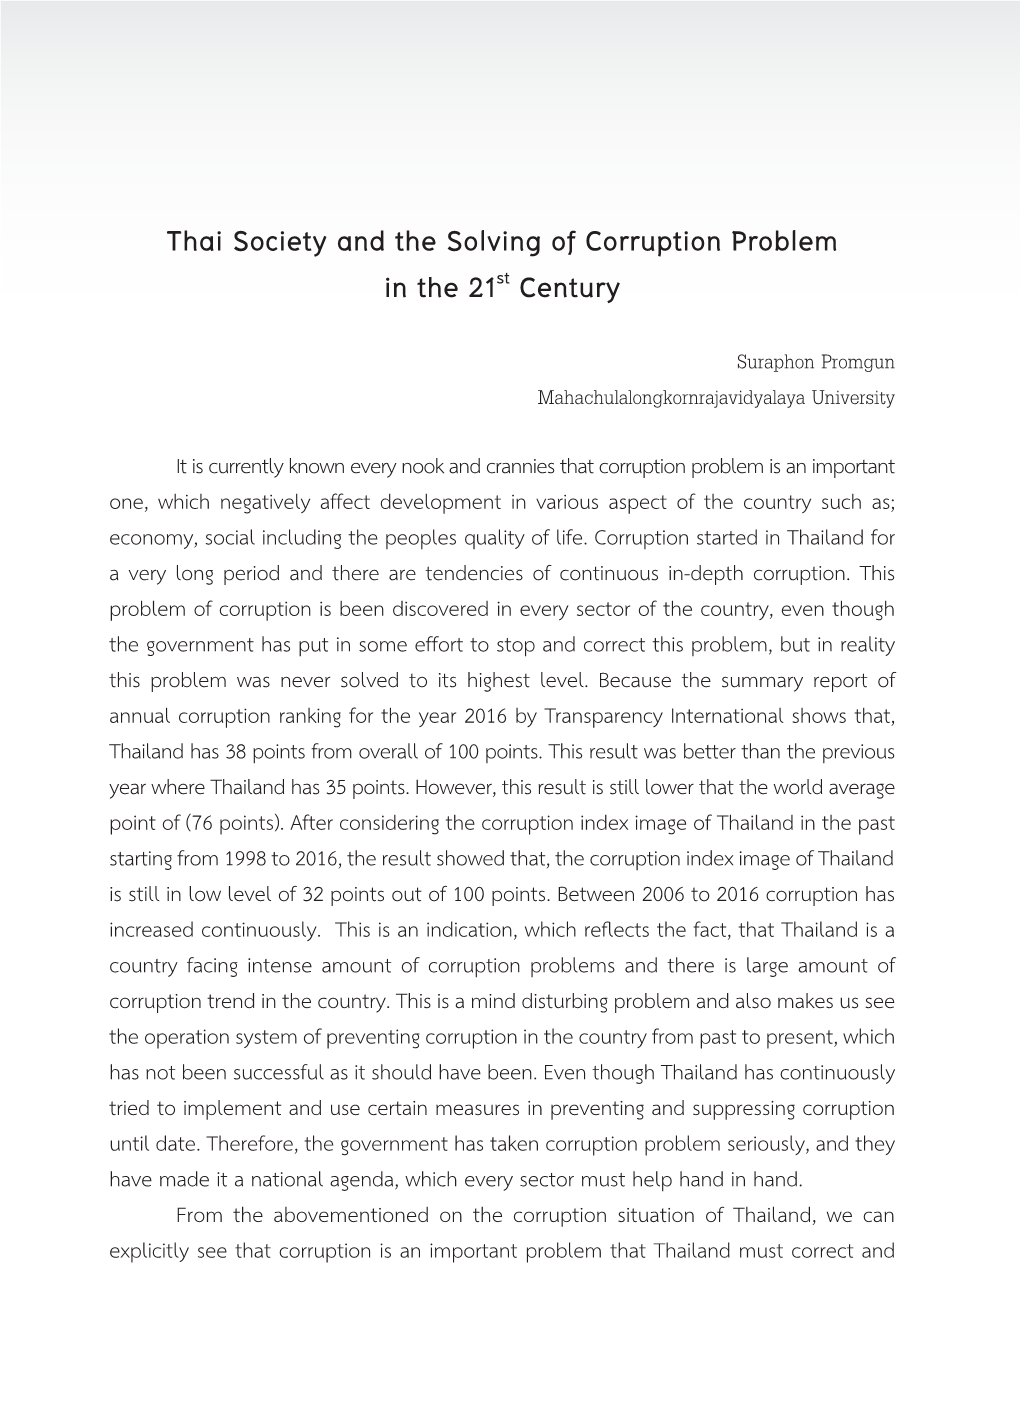 Thai Society and the Solving of Corruption Problem in the 21St Century